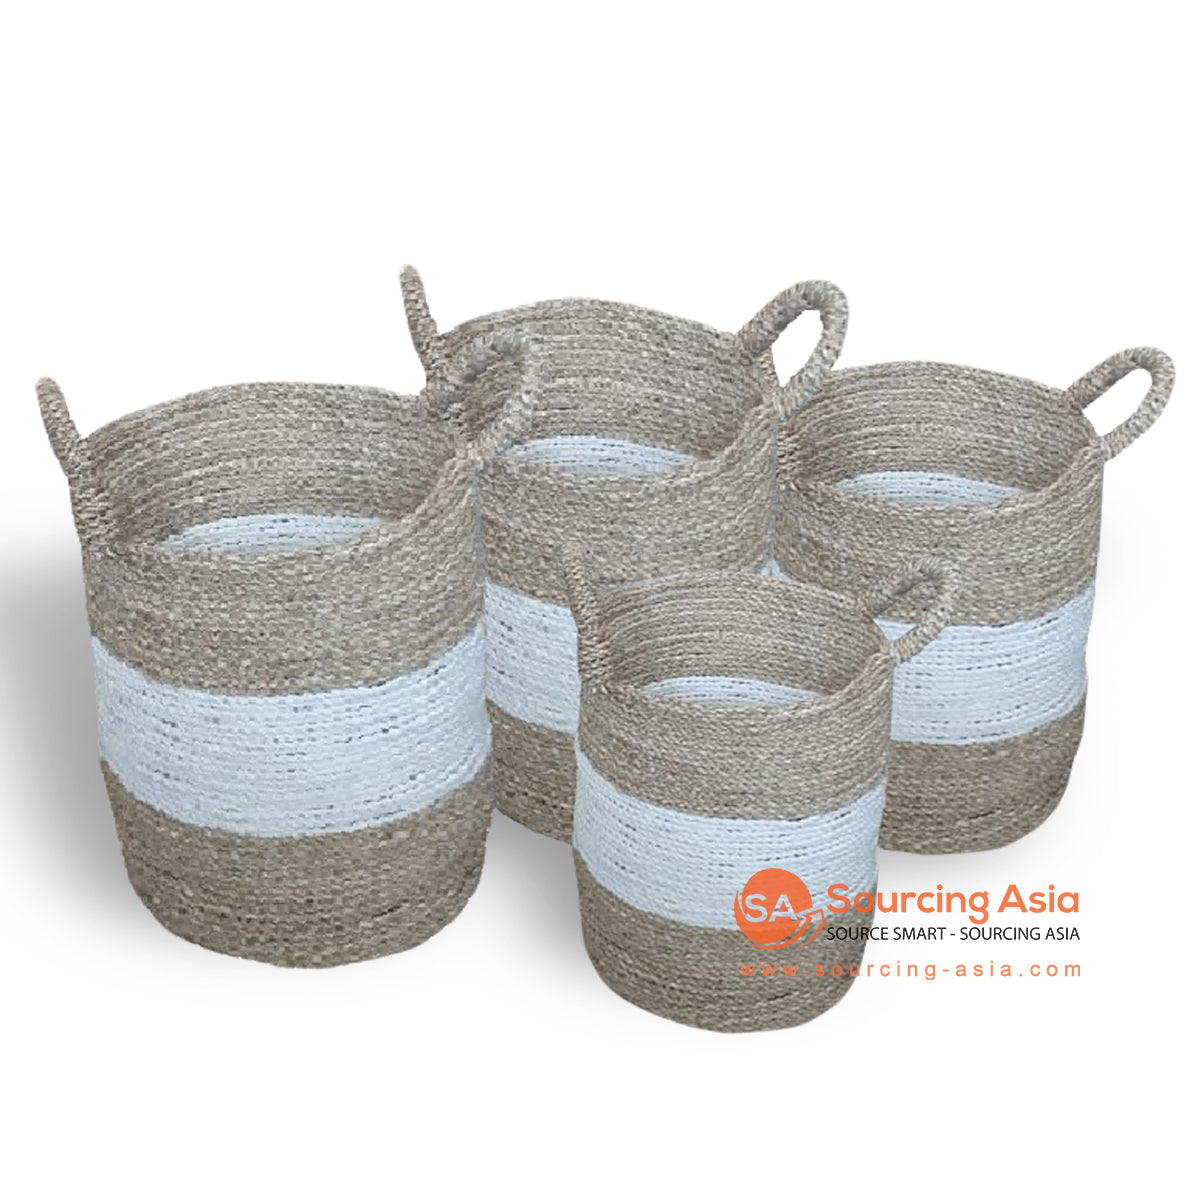 MTI109 SET OF FOUR NATURAL AND WHITE WOVEN LAUNDRY BASKETS WITH HANDLE